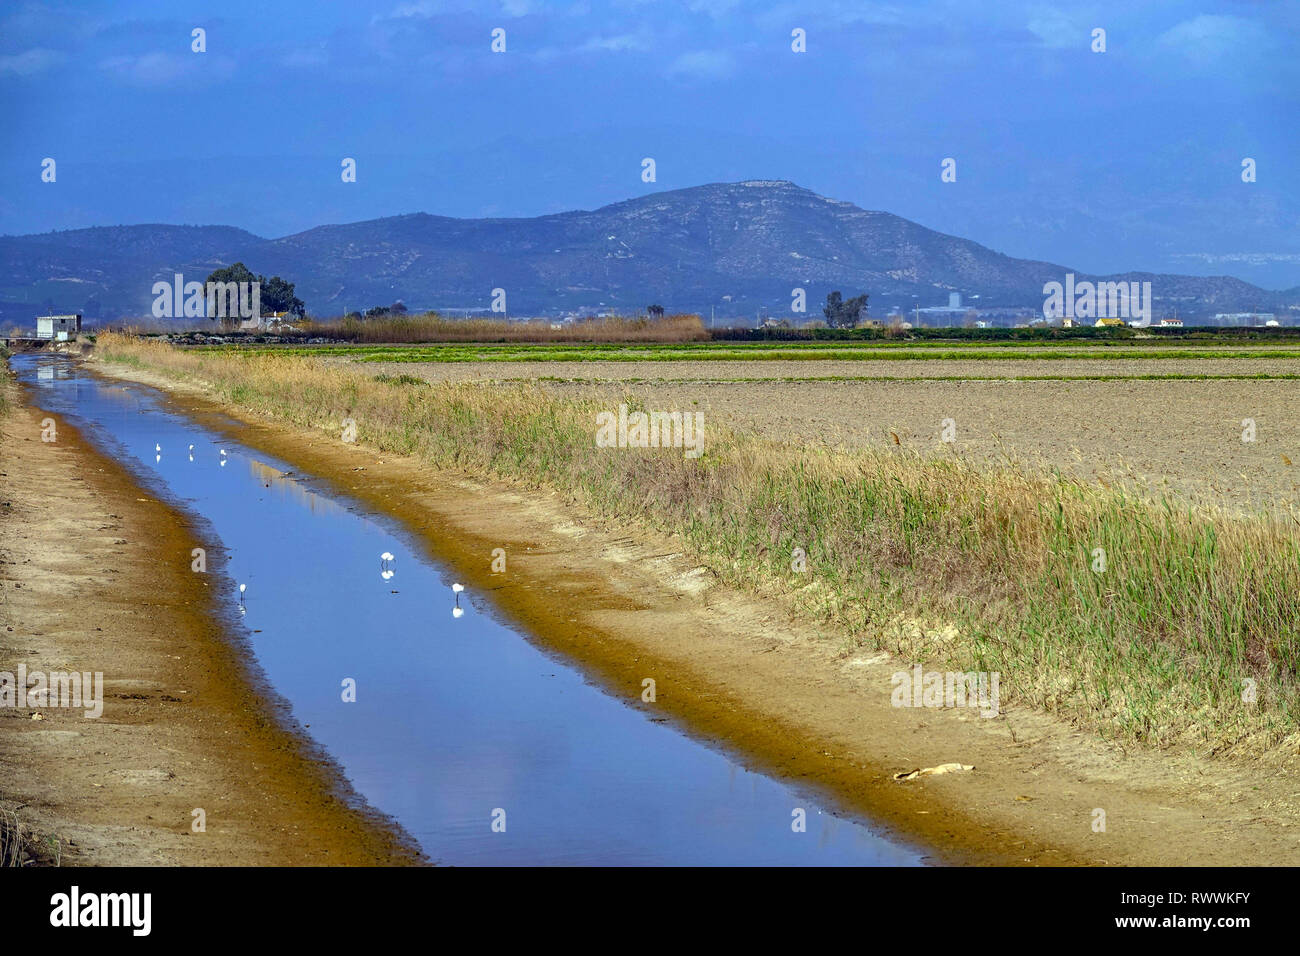 Wide open spaces, lakes and reed-beds, The Ebro Delta nature reserve, near Amposta, Catalunya, Spain Stock Photo